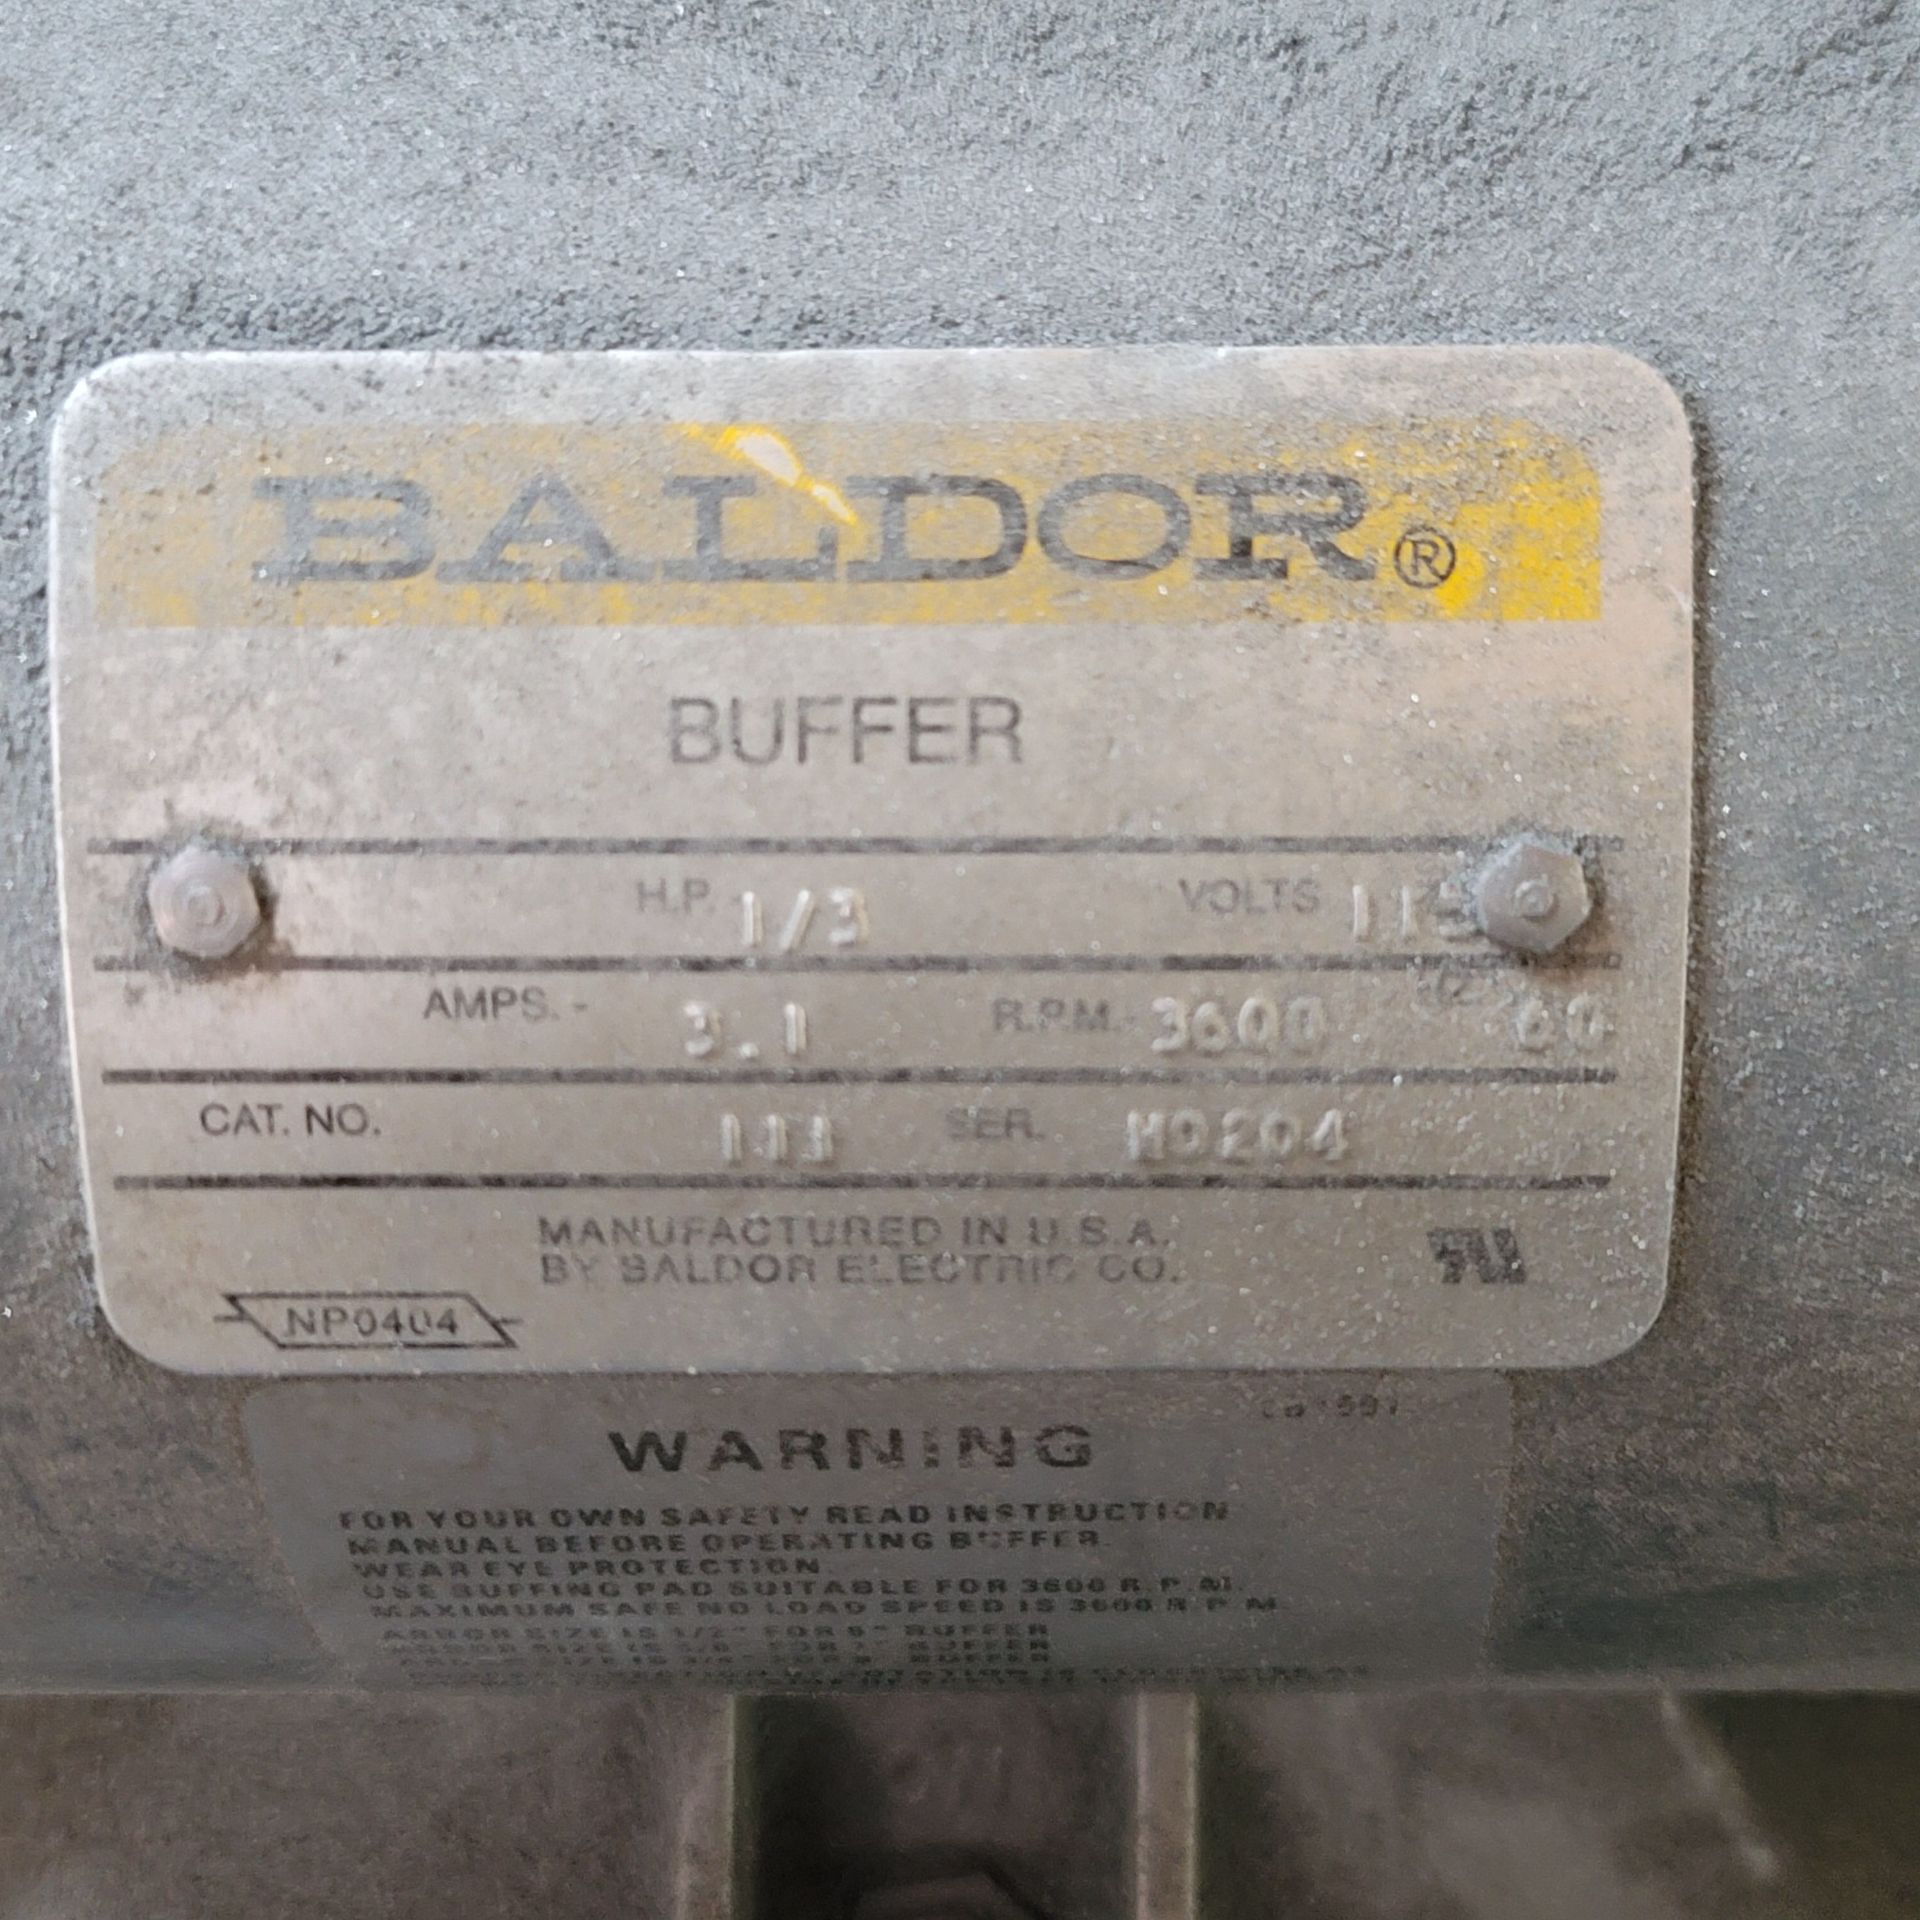 BALDOR 6" DOUBLE END BENCH BUFFER ON PEDESTAL, CAT. NO. 111, 1/3 HP, 3,600 RPM - Image 2 of 2